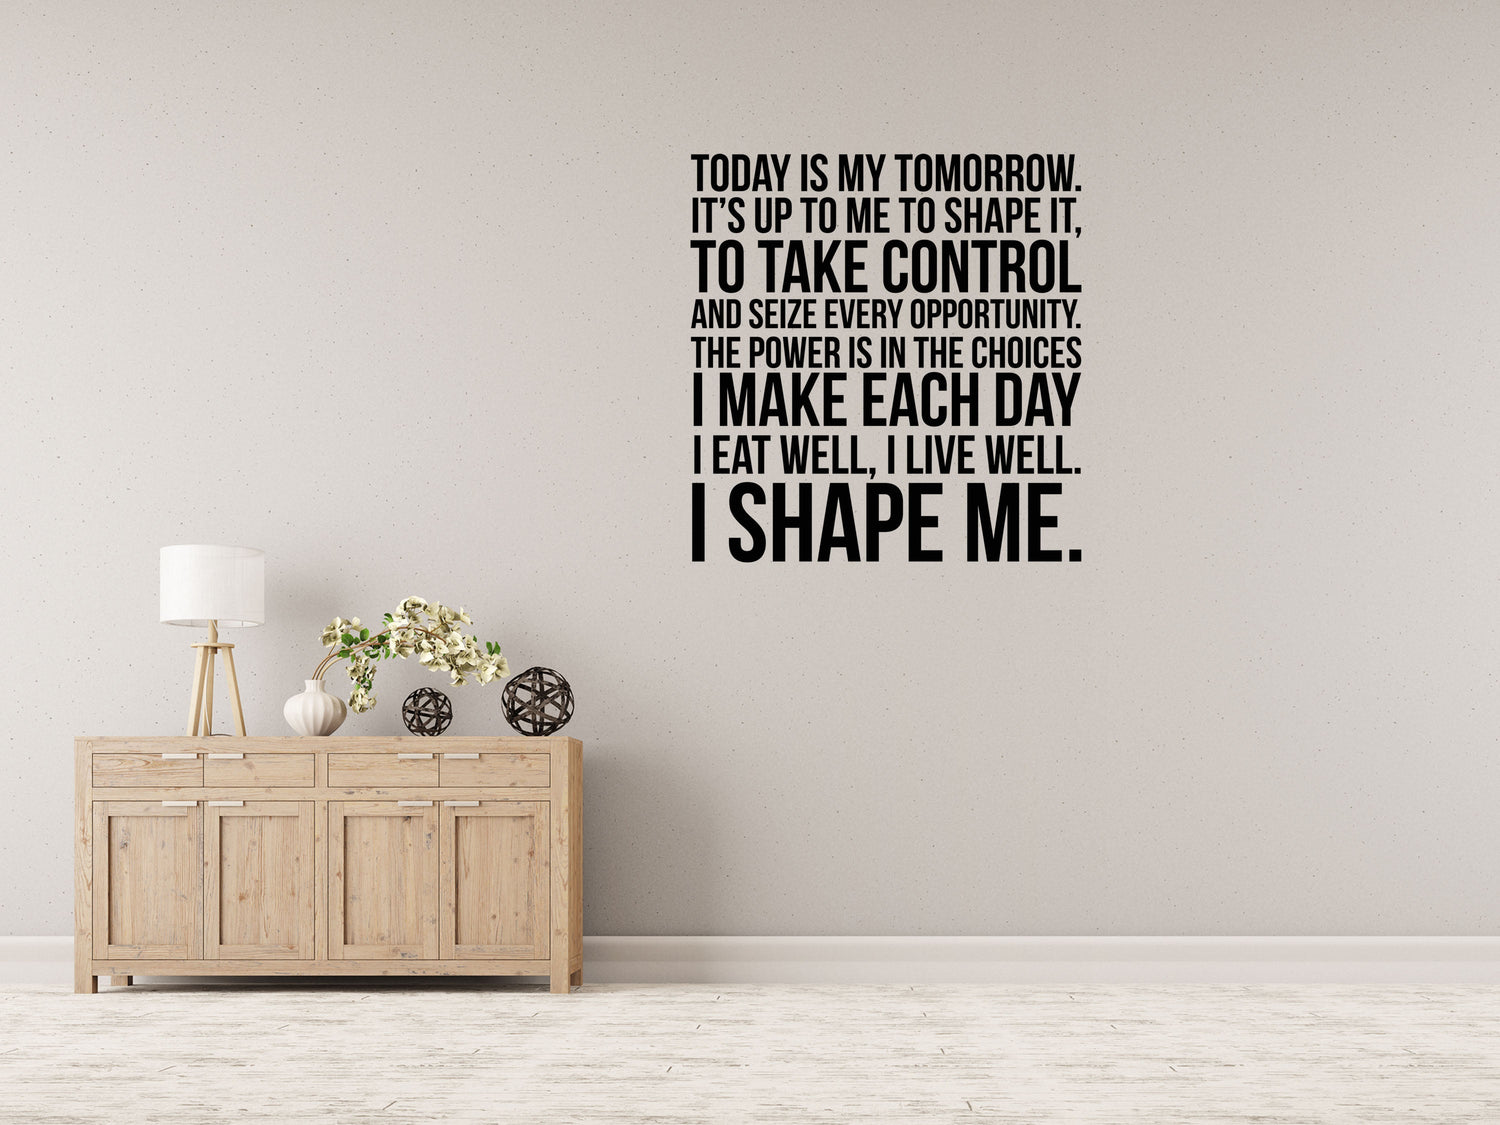 Today Is My Tomorrow Office Wall Decal - Inspirational Wall Signs Vinyl Wall Decal Inspirational Wall Signs 